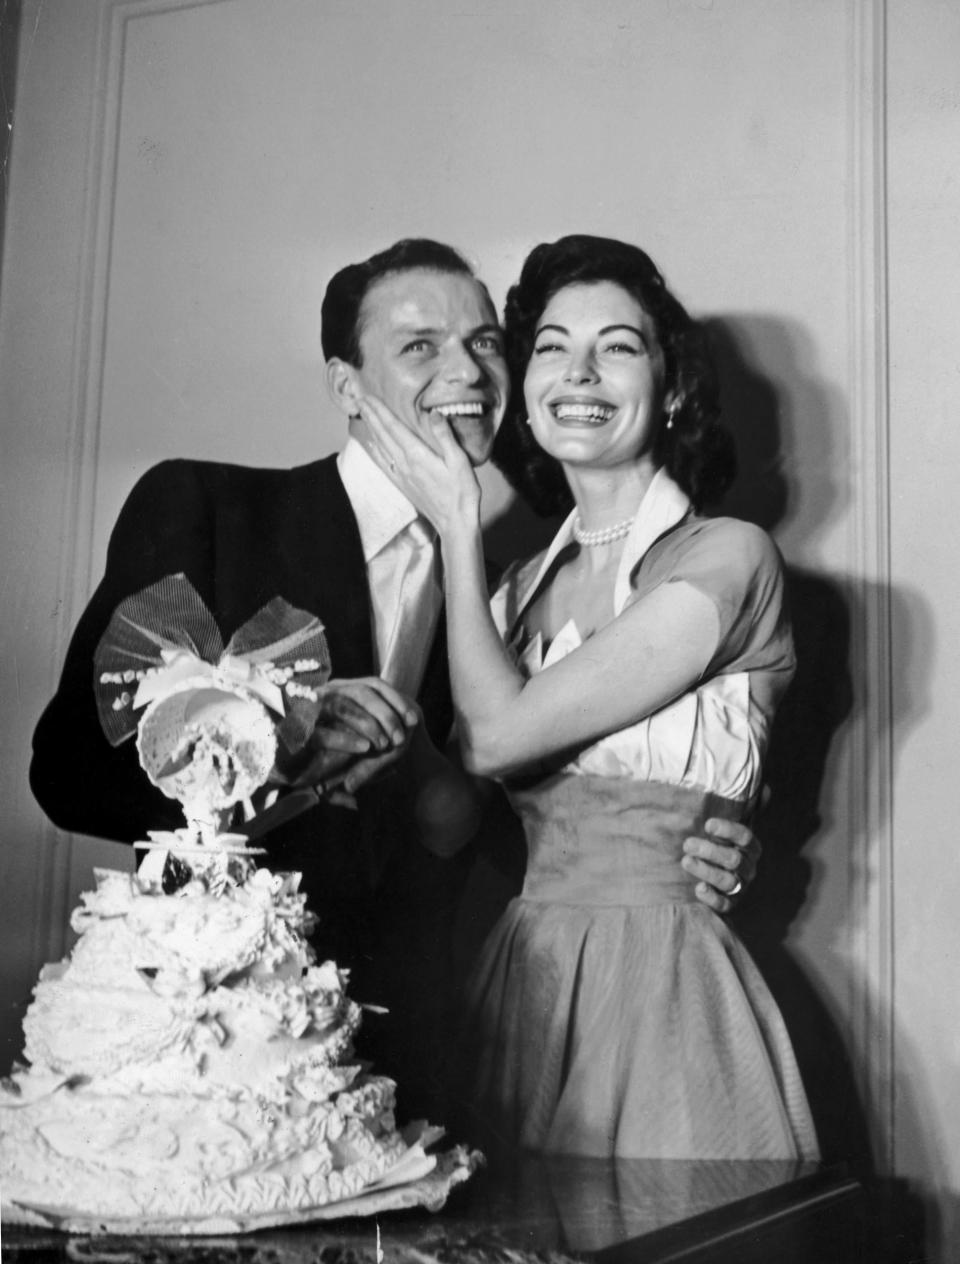 Ava Gardner wore a dress by Howard Greer when she married Frank Sinatra in 1951(Getty Images)